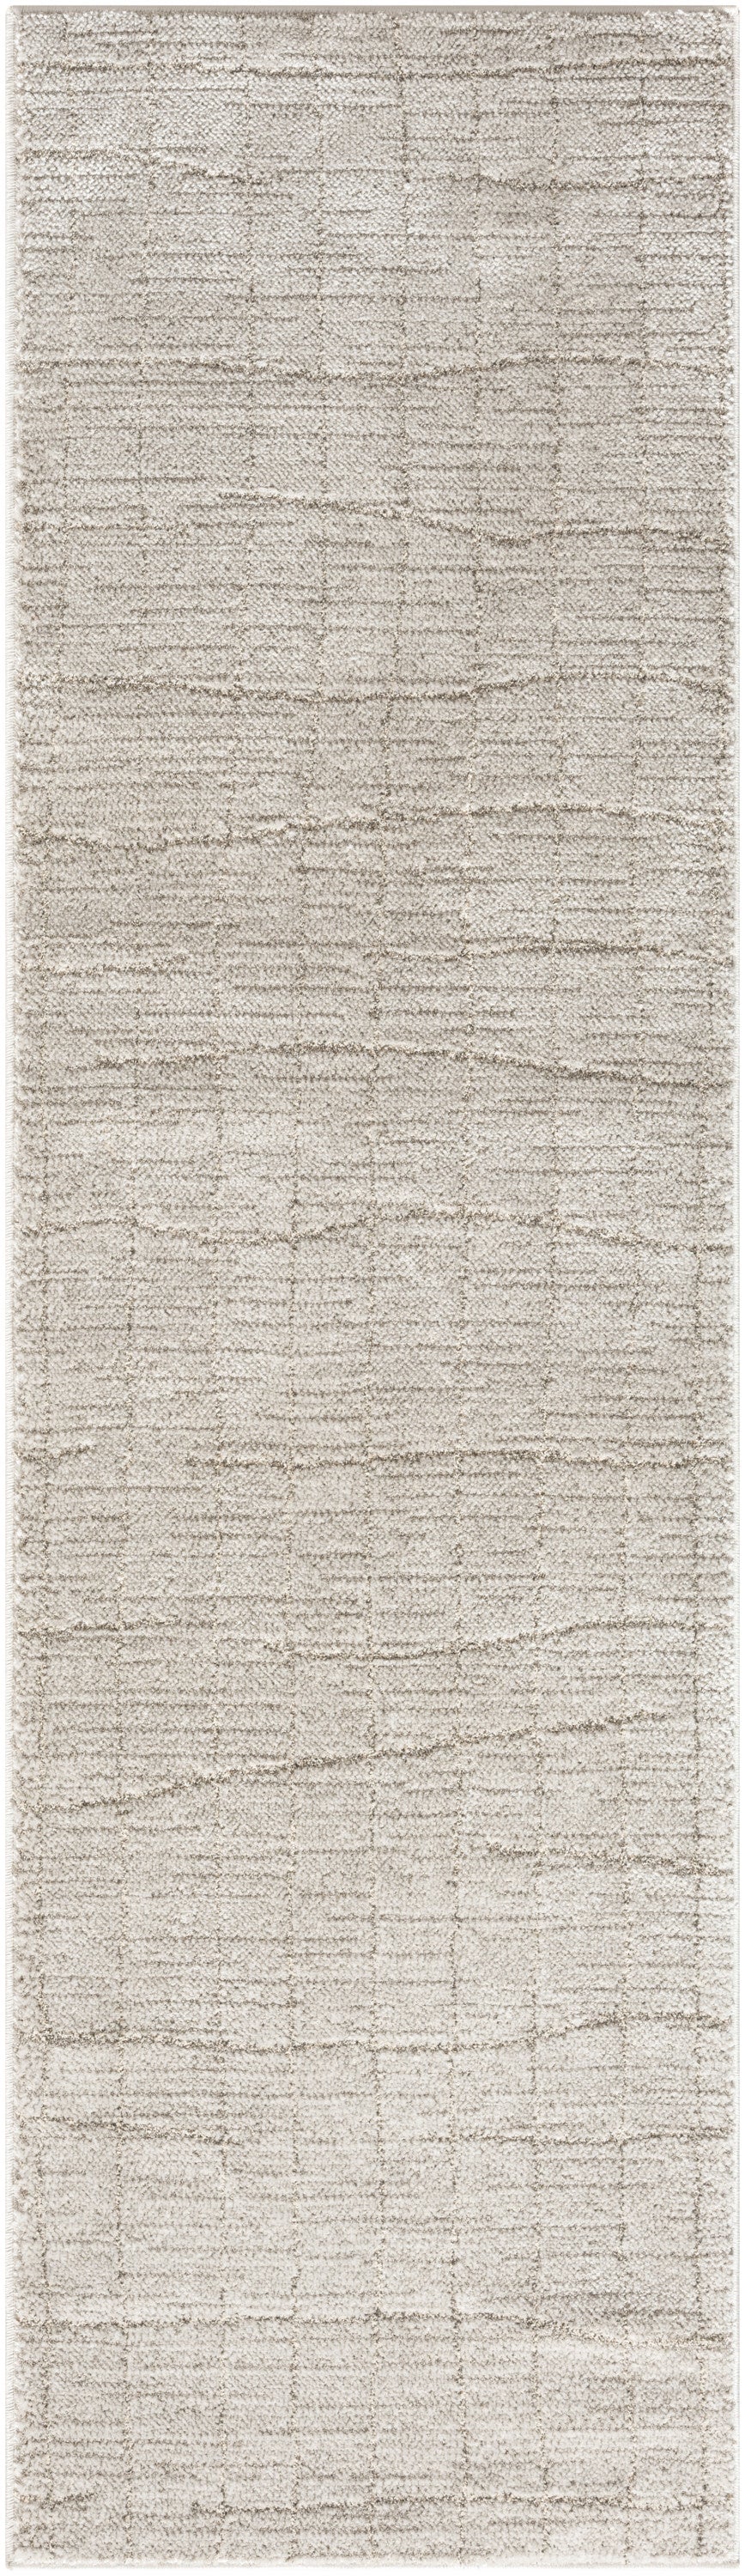 Nourison Home Andes AND04 Grey Contemporary Woven Rug